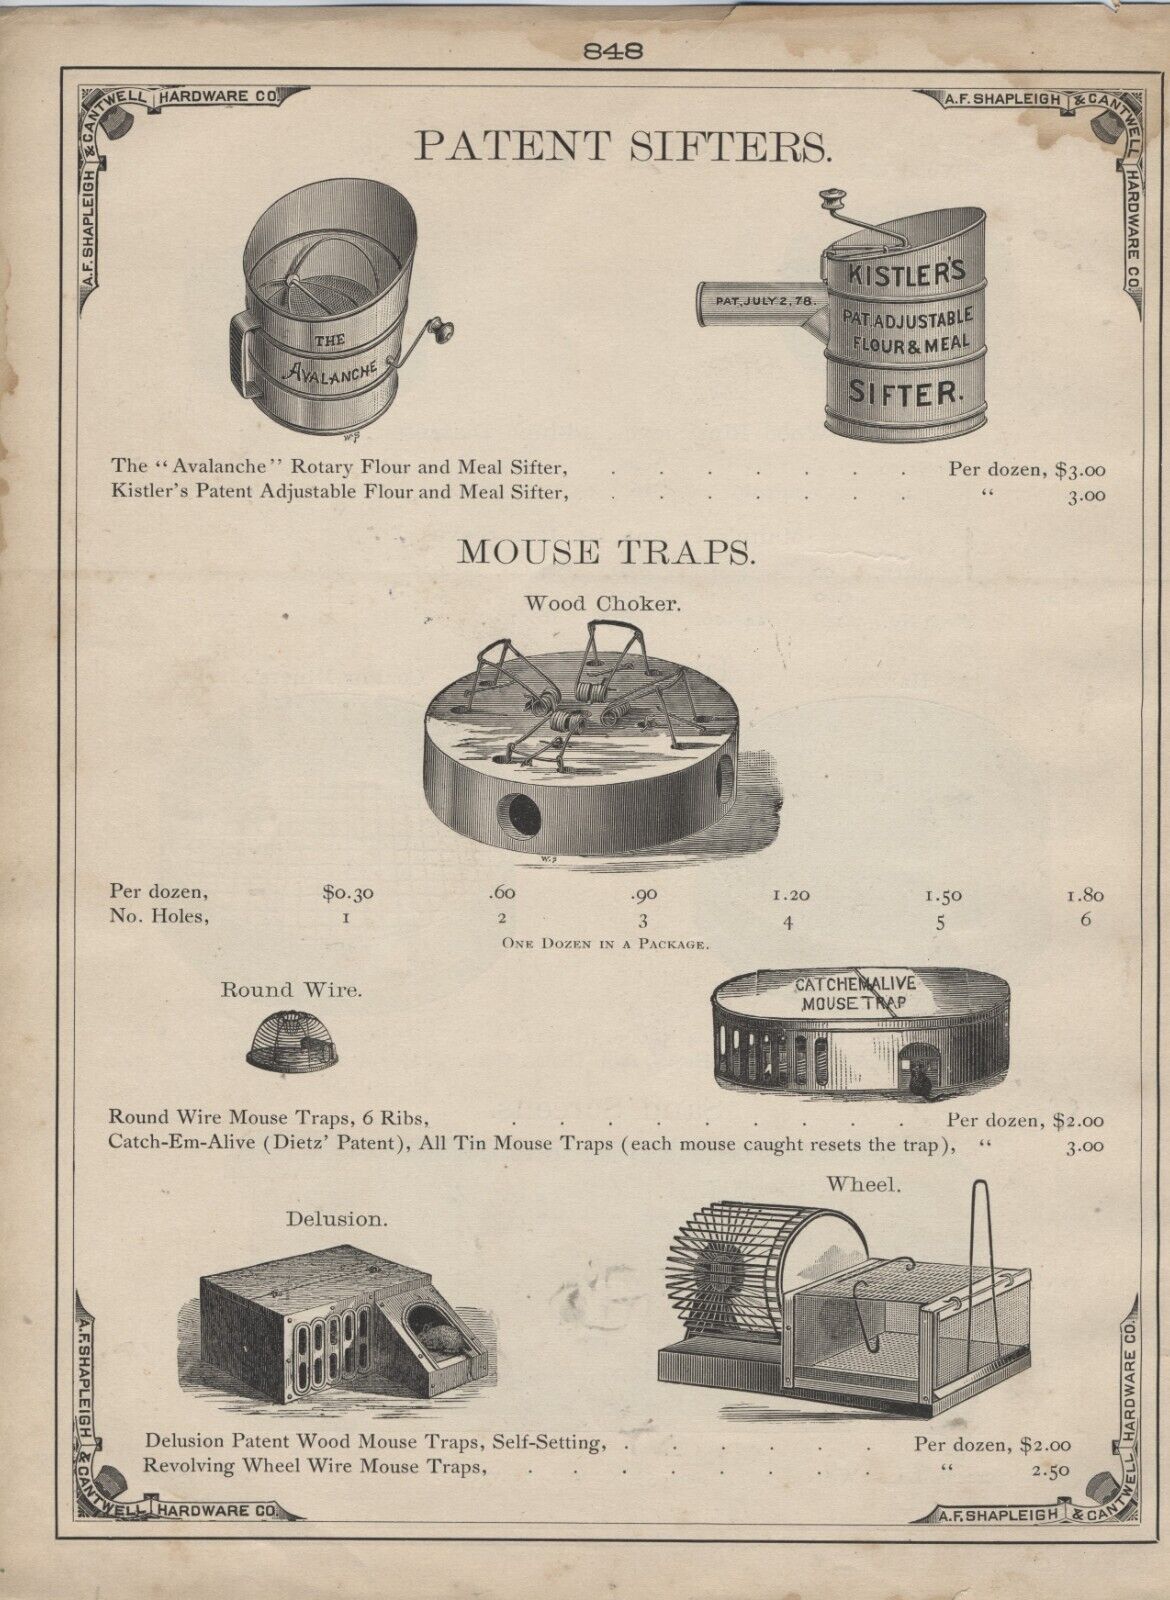 1883 CATALOG PAGE A F SHAPLEIGH HARDWARE. MOUSE TRAP, SIEVES ST. LOUIS MISSOURI